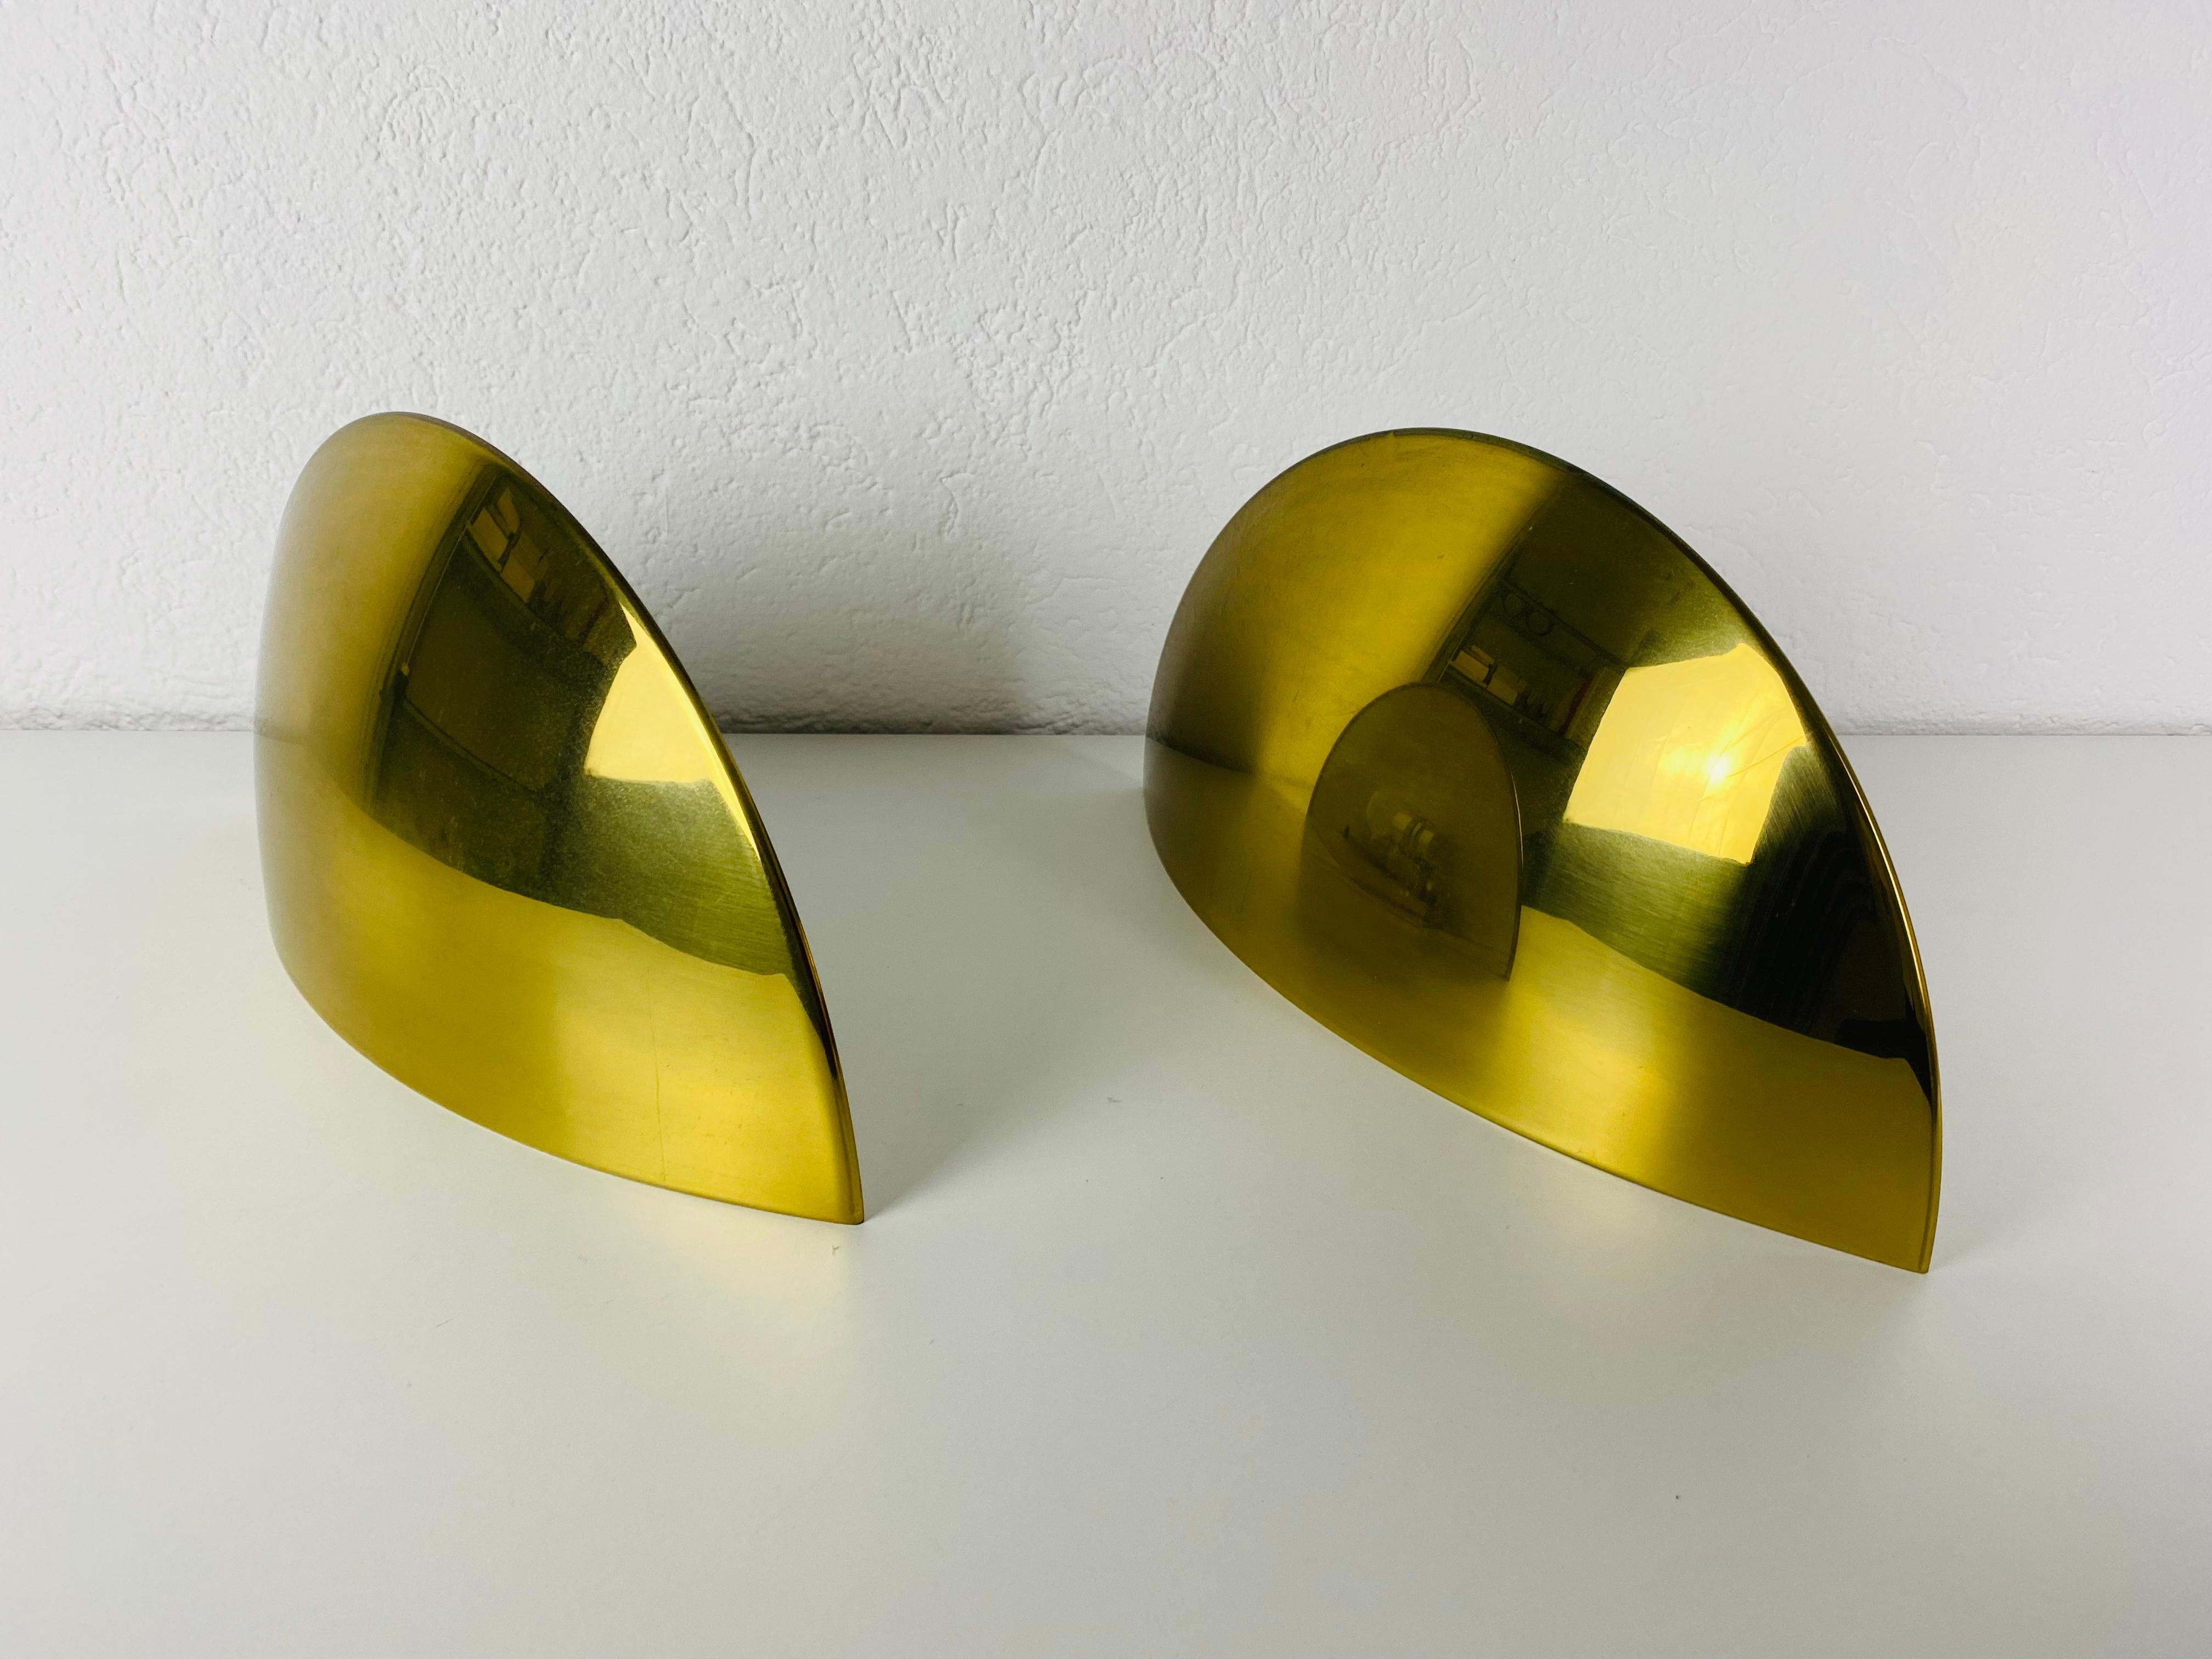 German Pair of Florian Schulz Midcentury Brass Wall Lamps, 1960s For Sale